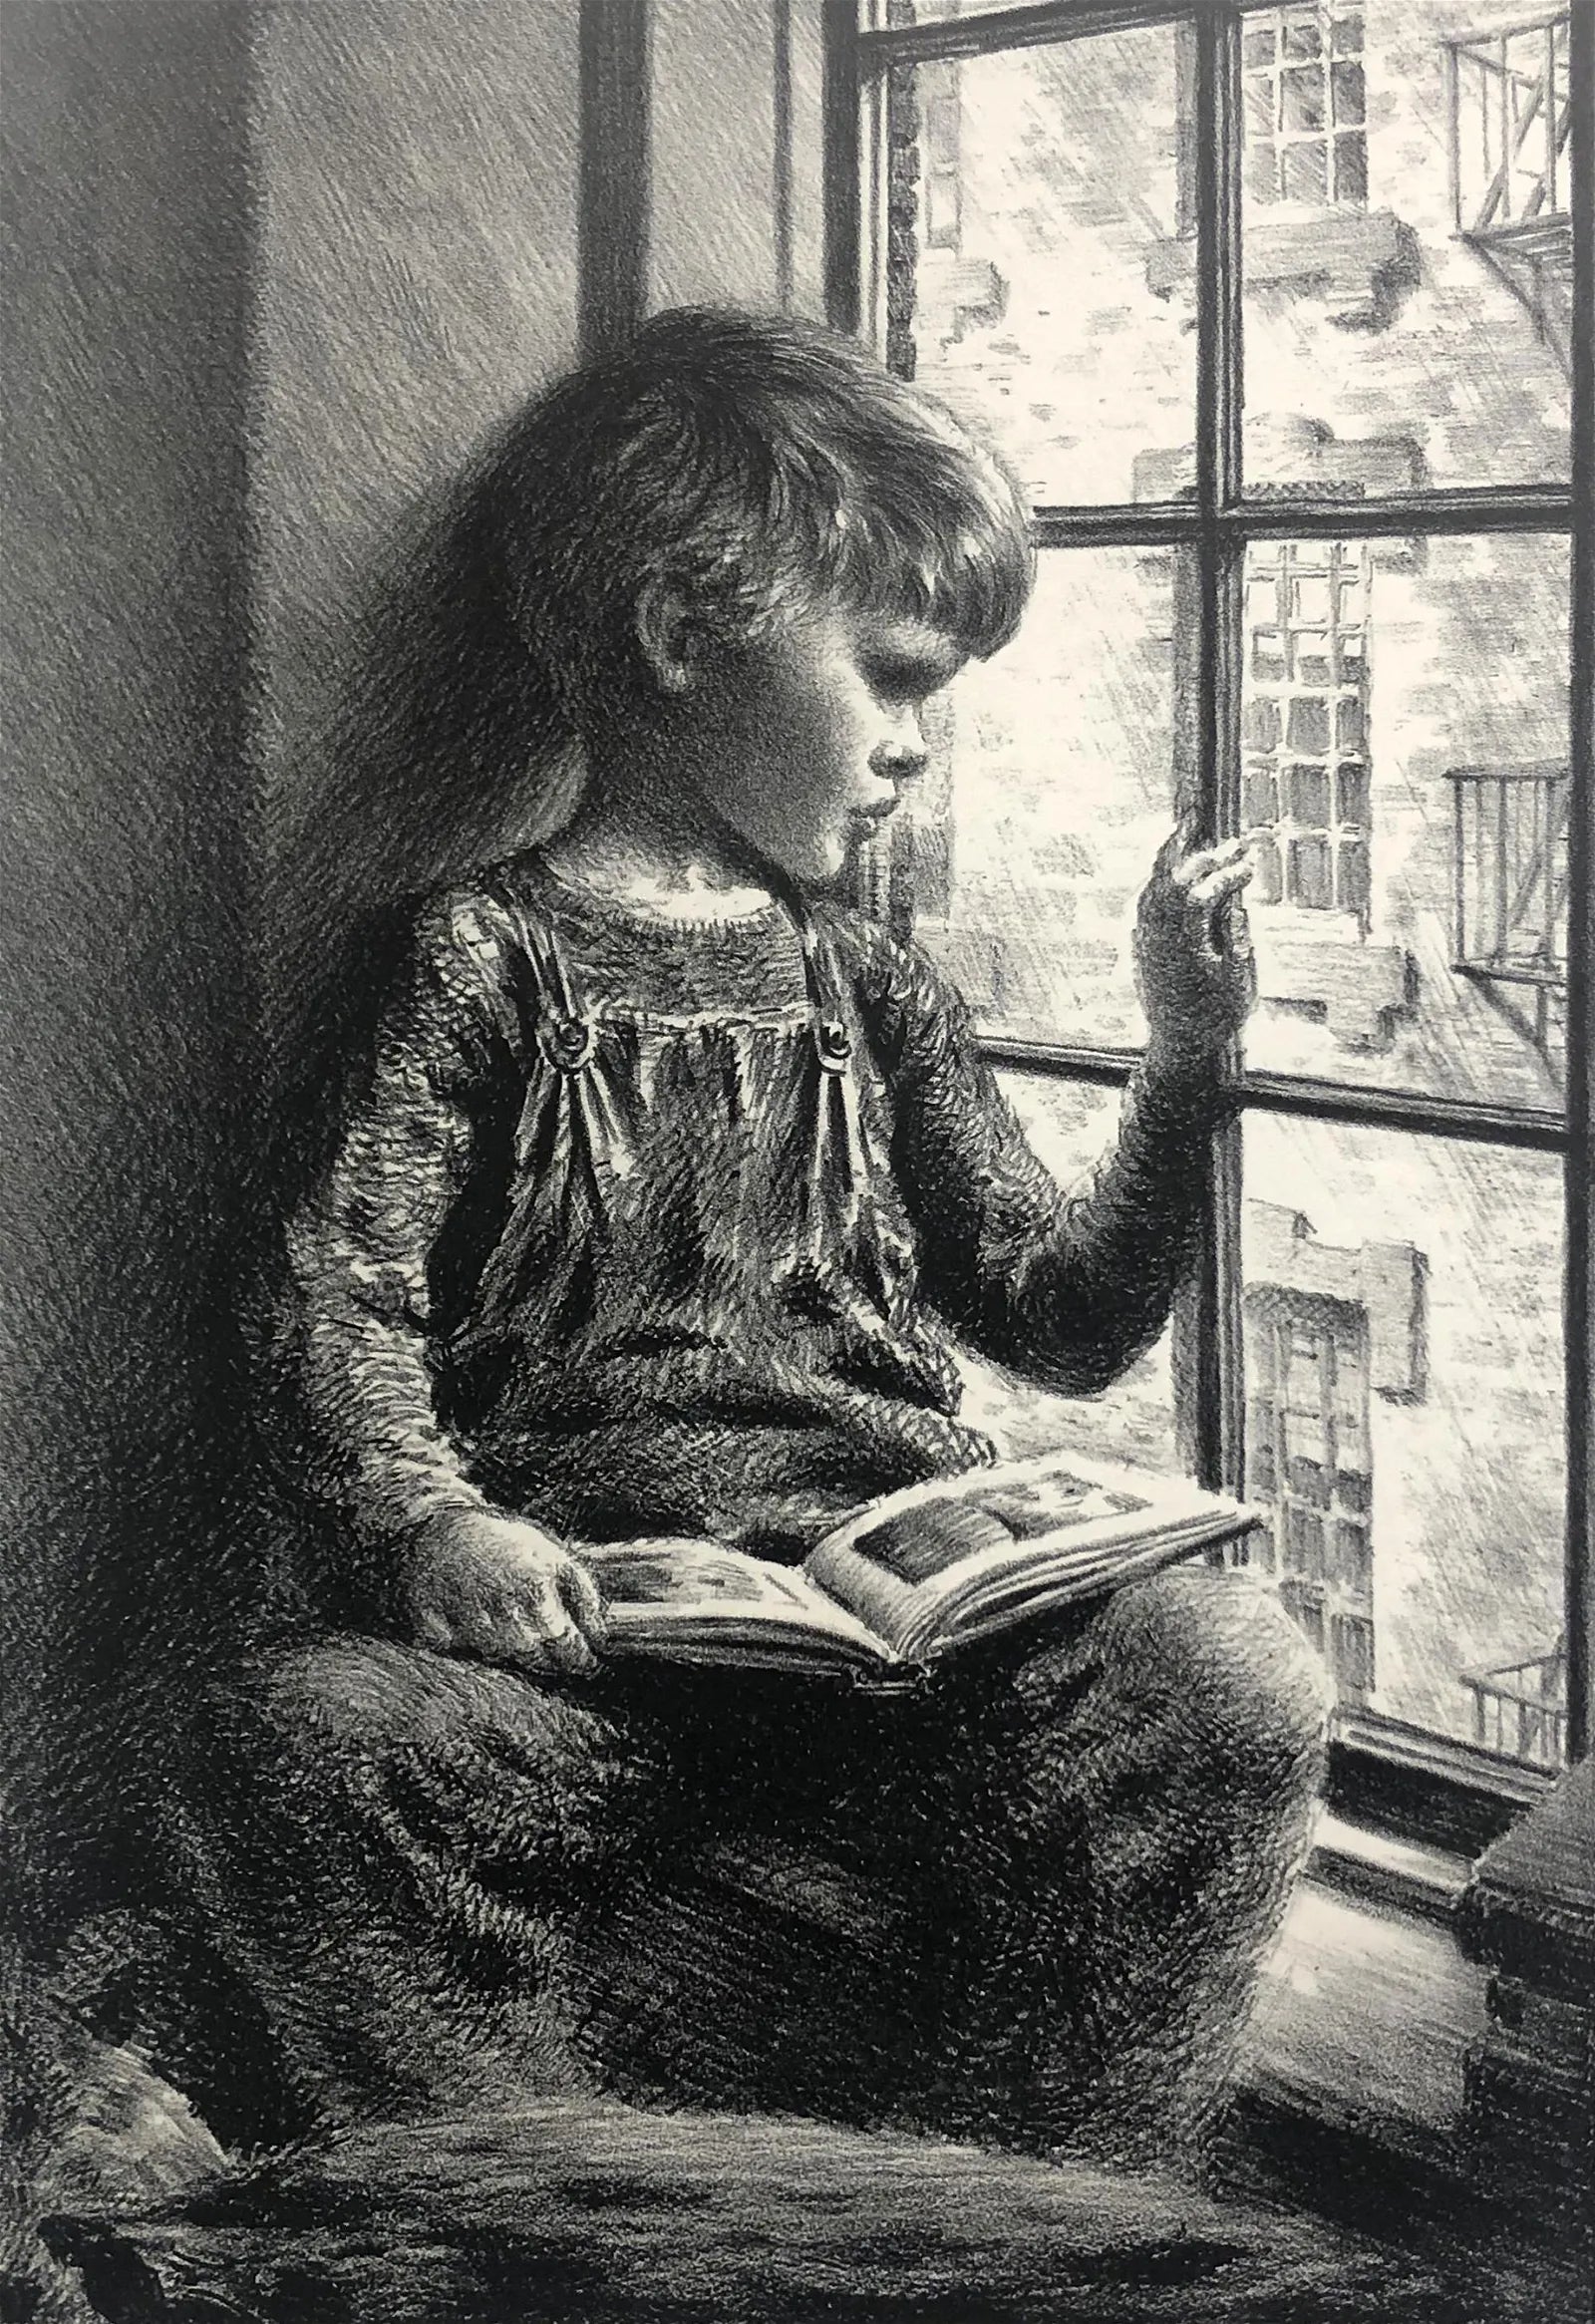 AW8-010: James Ormsbee Chapin - Circa 1943 - Lithograph - "Child at Window"